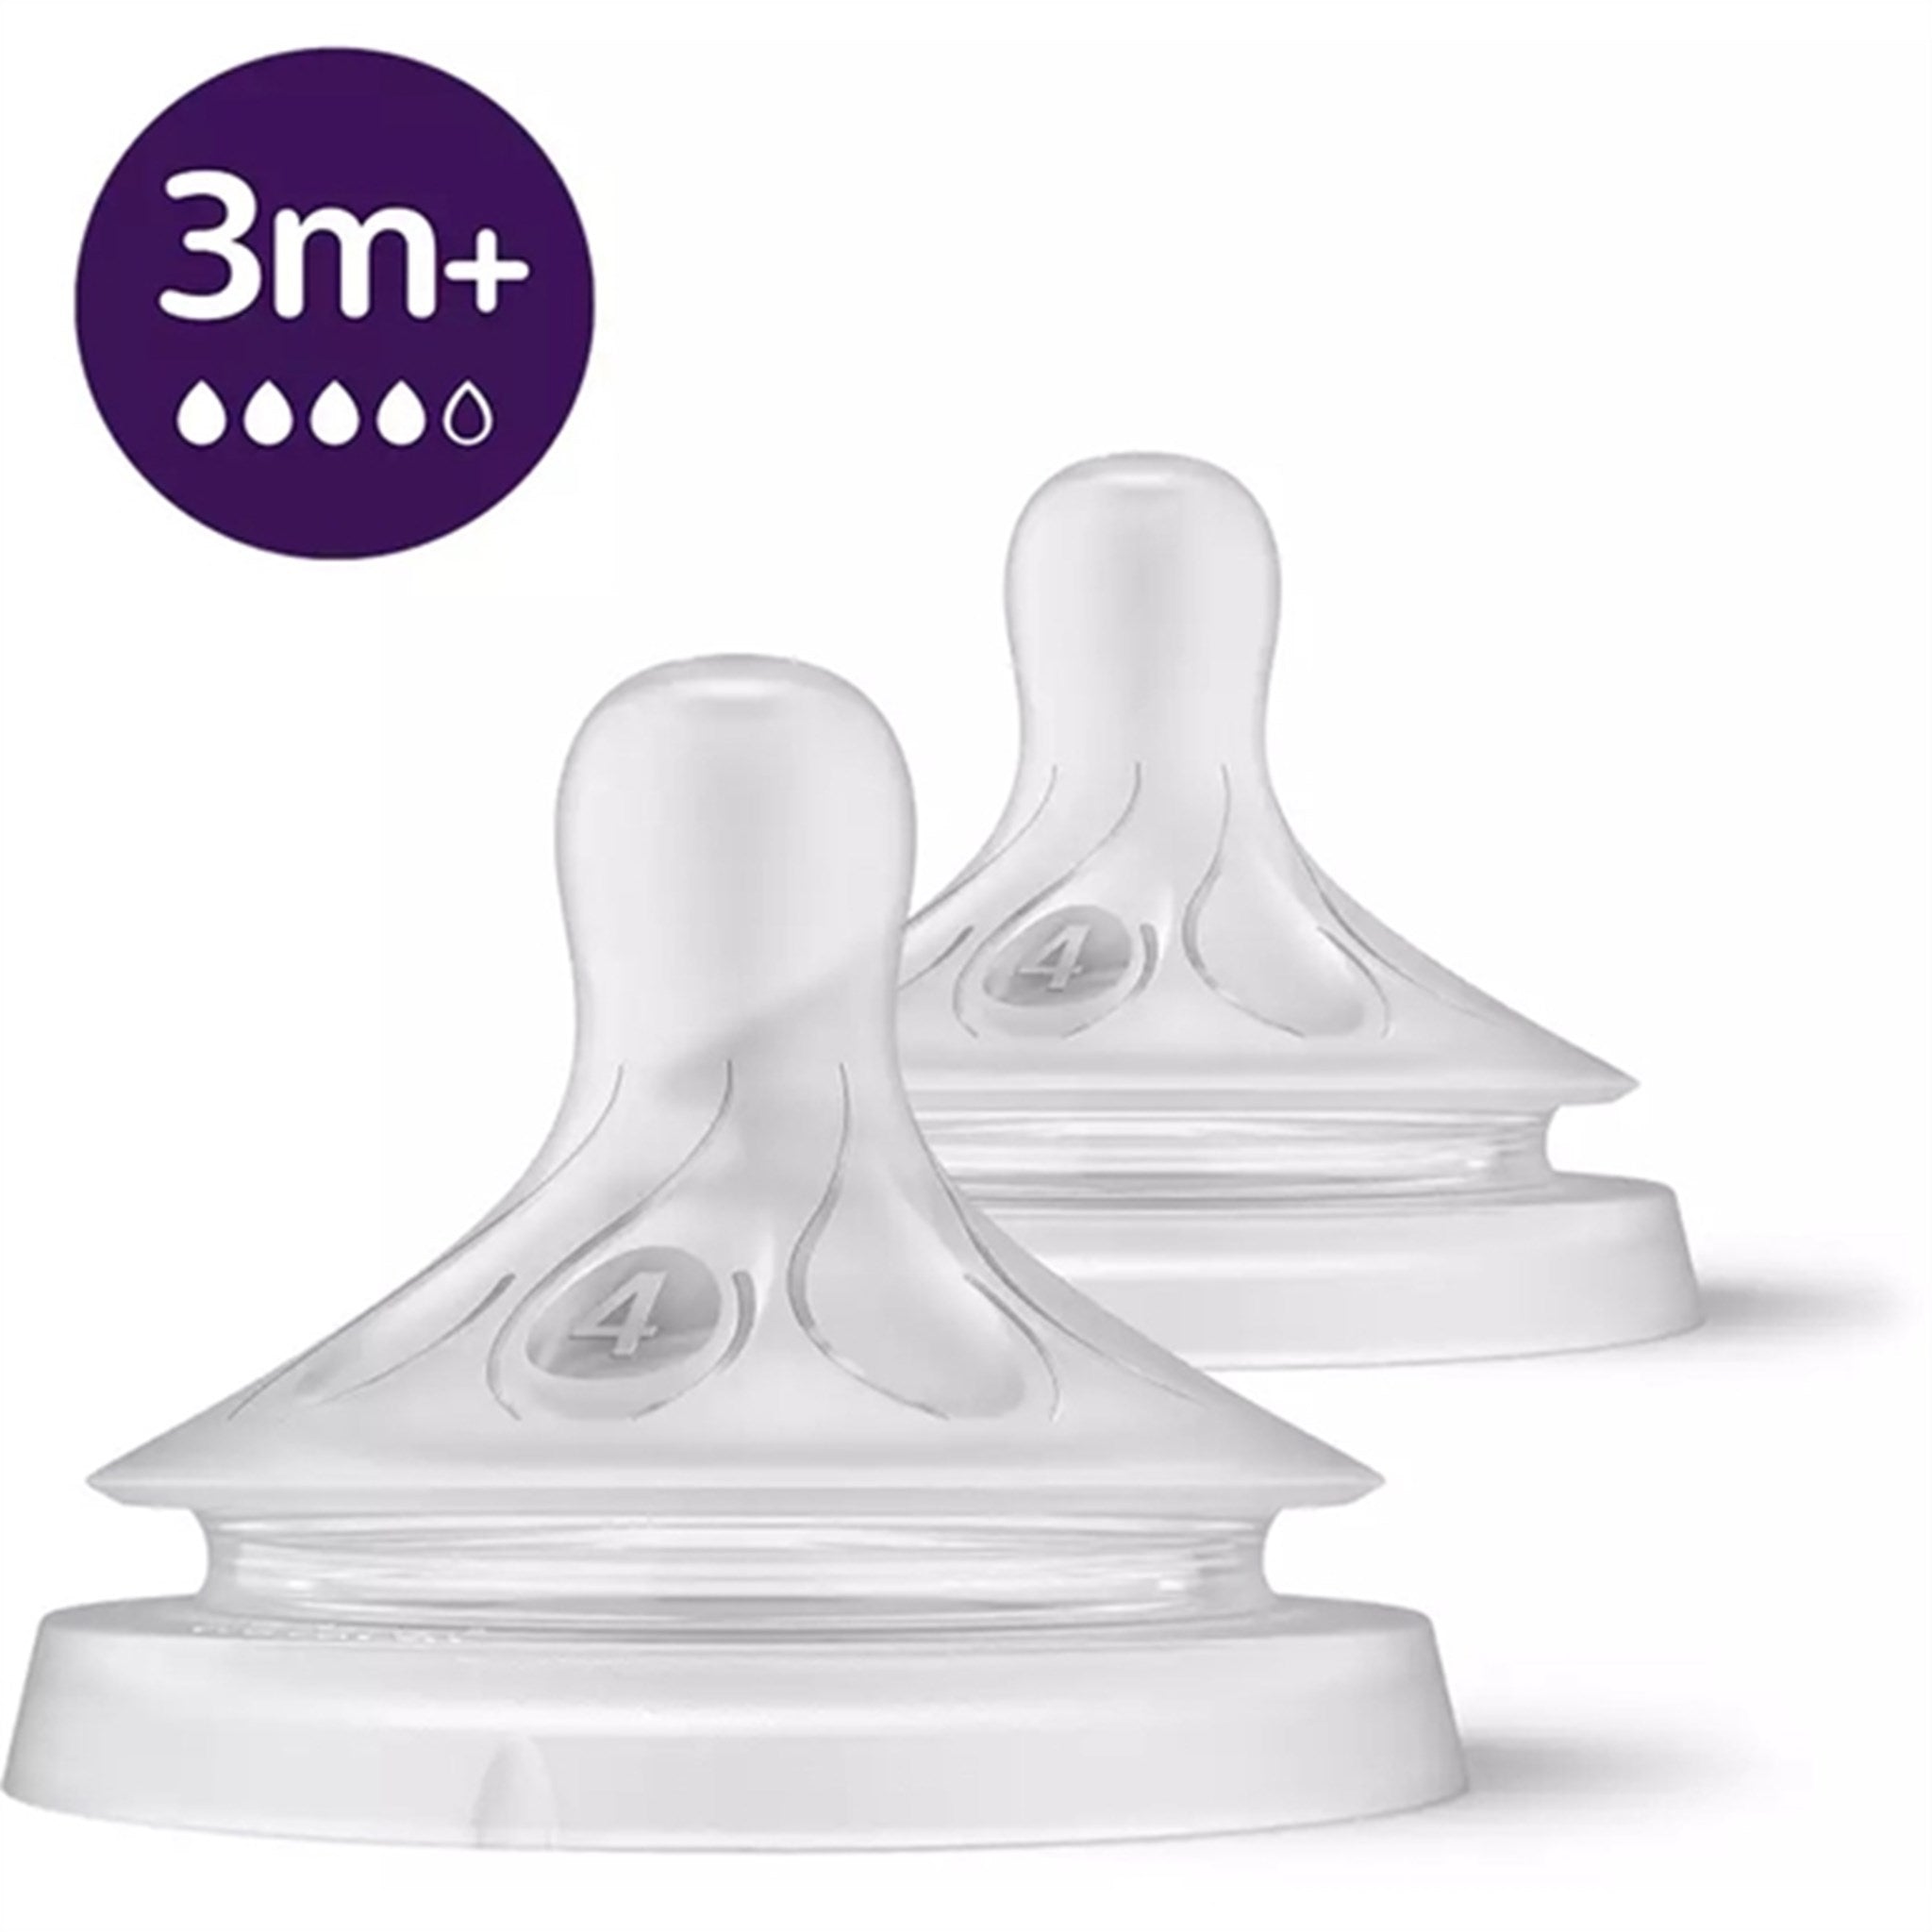 Philips Avent Natural Feeding Bottle Heads Response 3 months 2-pack 3